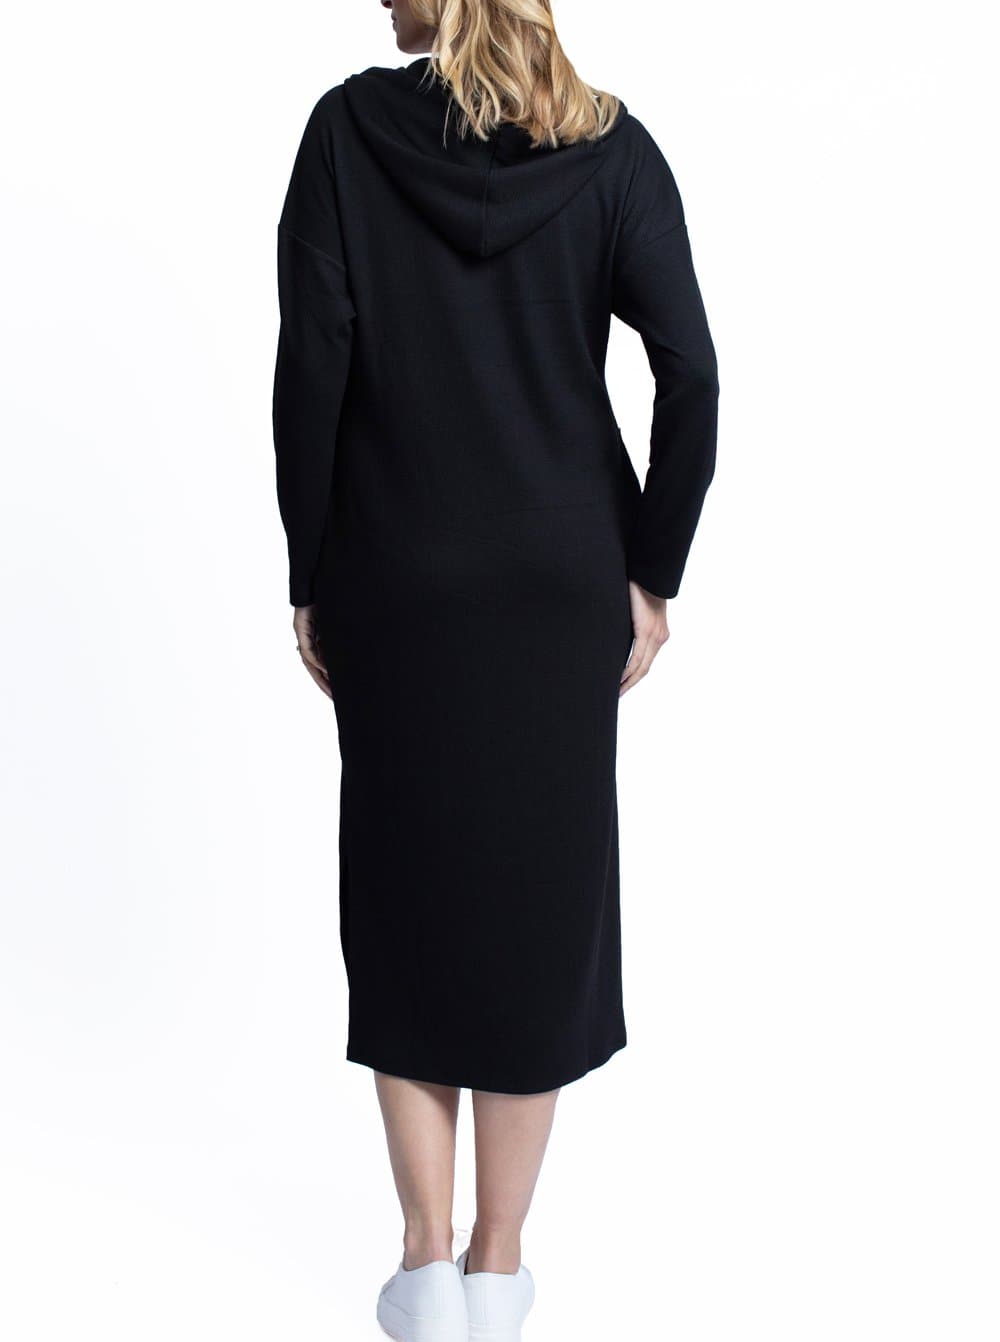 Back View - Maternity Oversize Hoodie Button Nursing Dress - Black - Angel Maternity - Maternity clothes